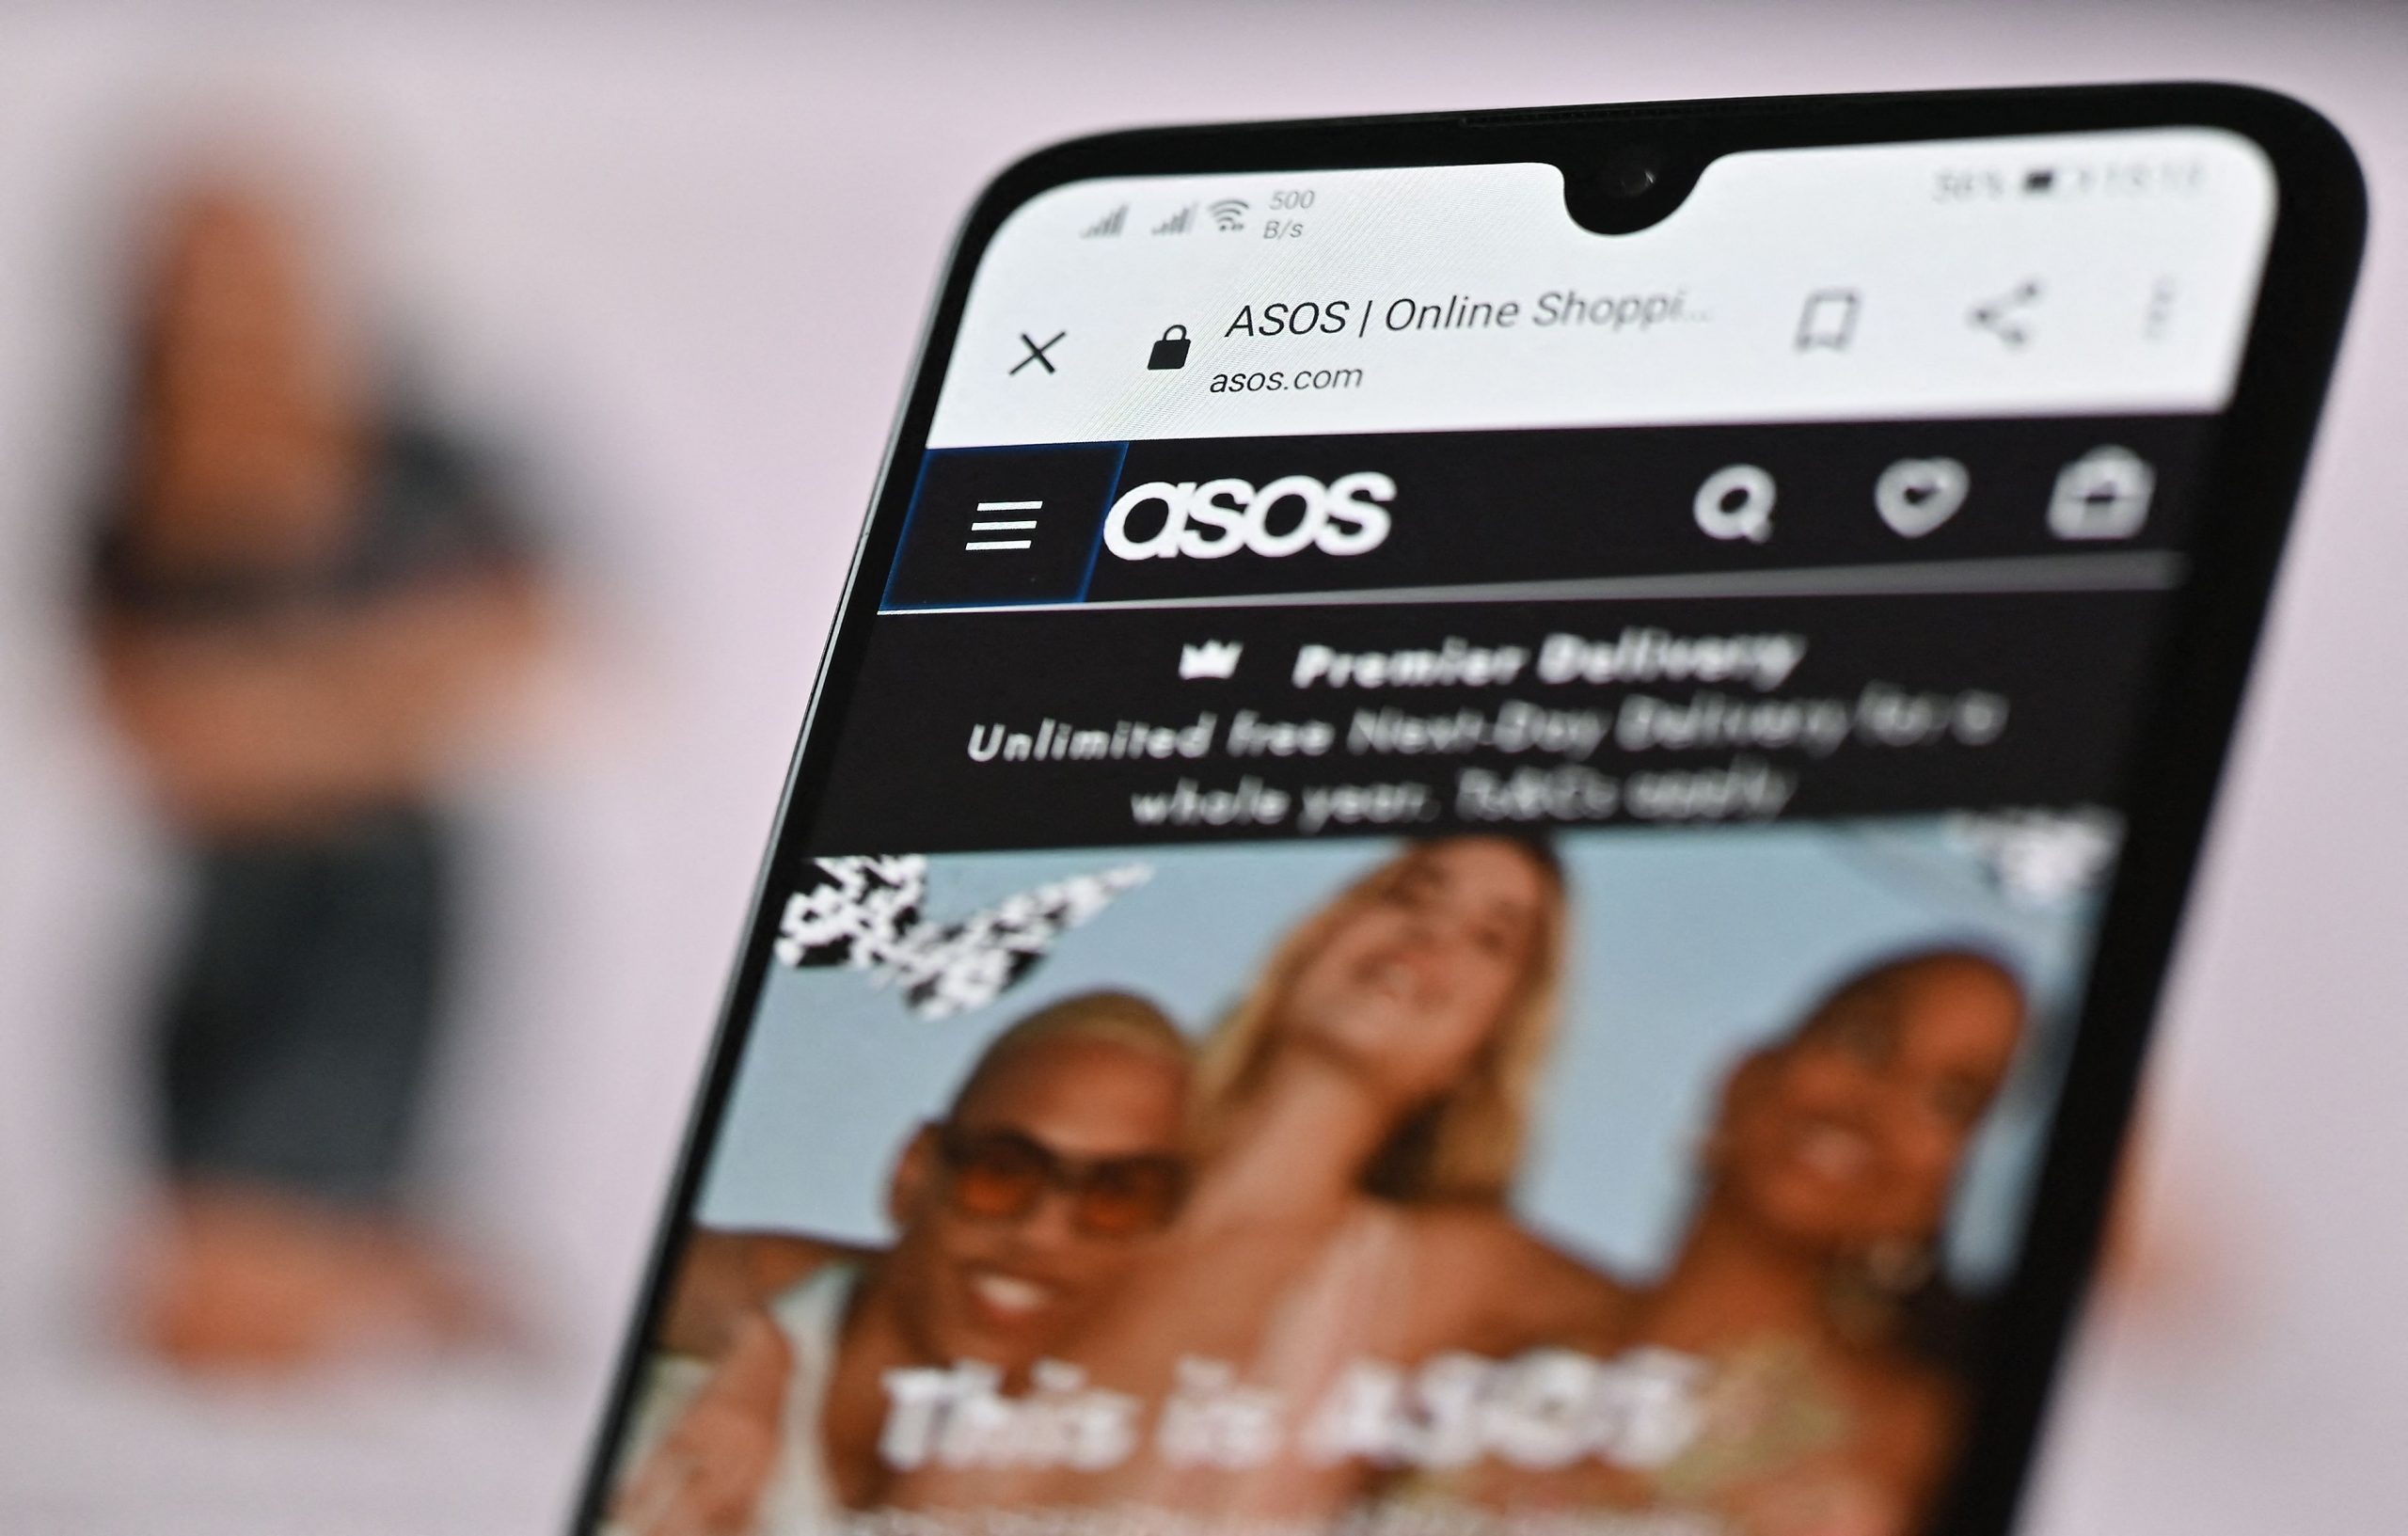 ASOS launches new website where EVERYTHING is £5 – but you’d better be quick to score a bargain